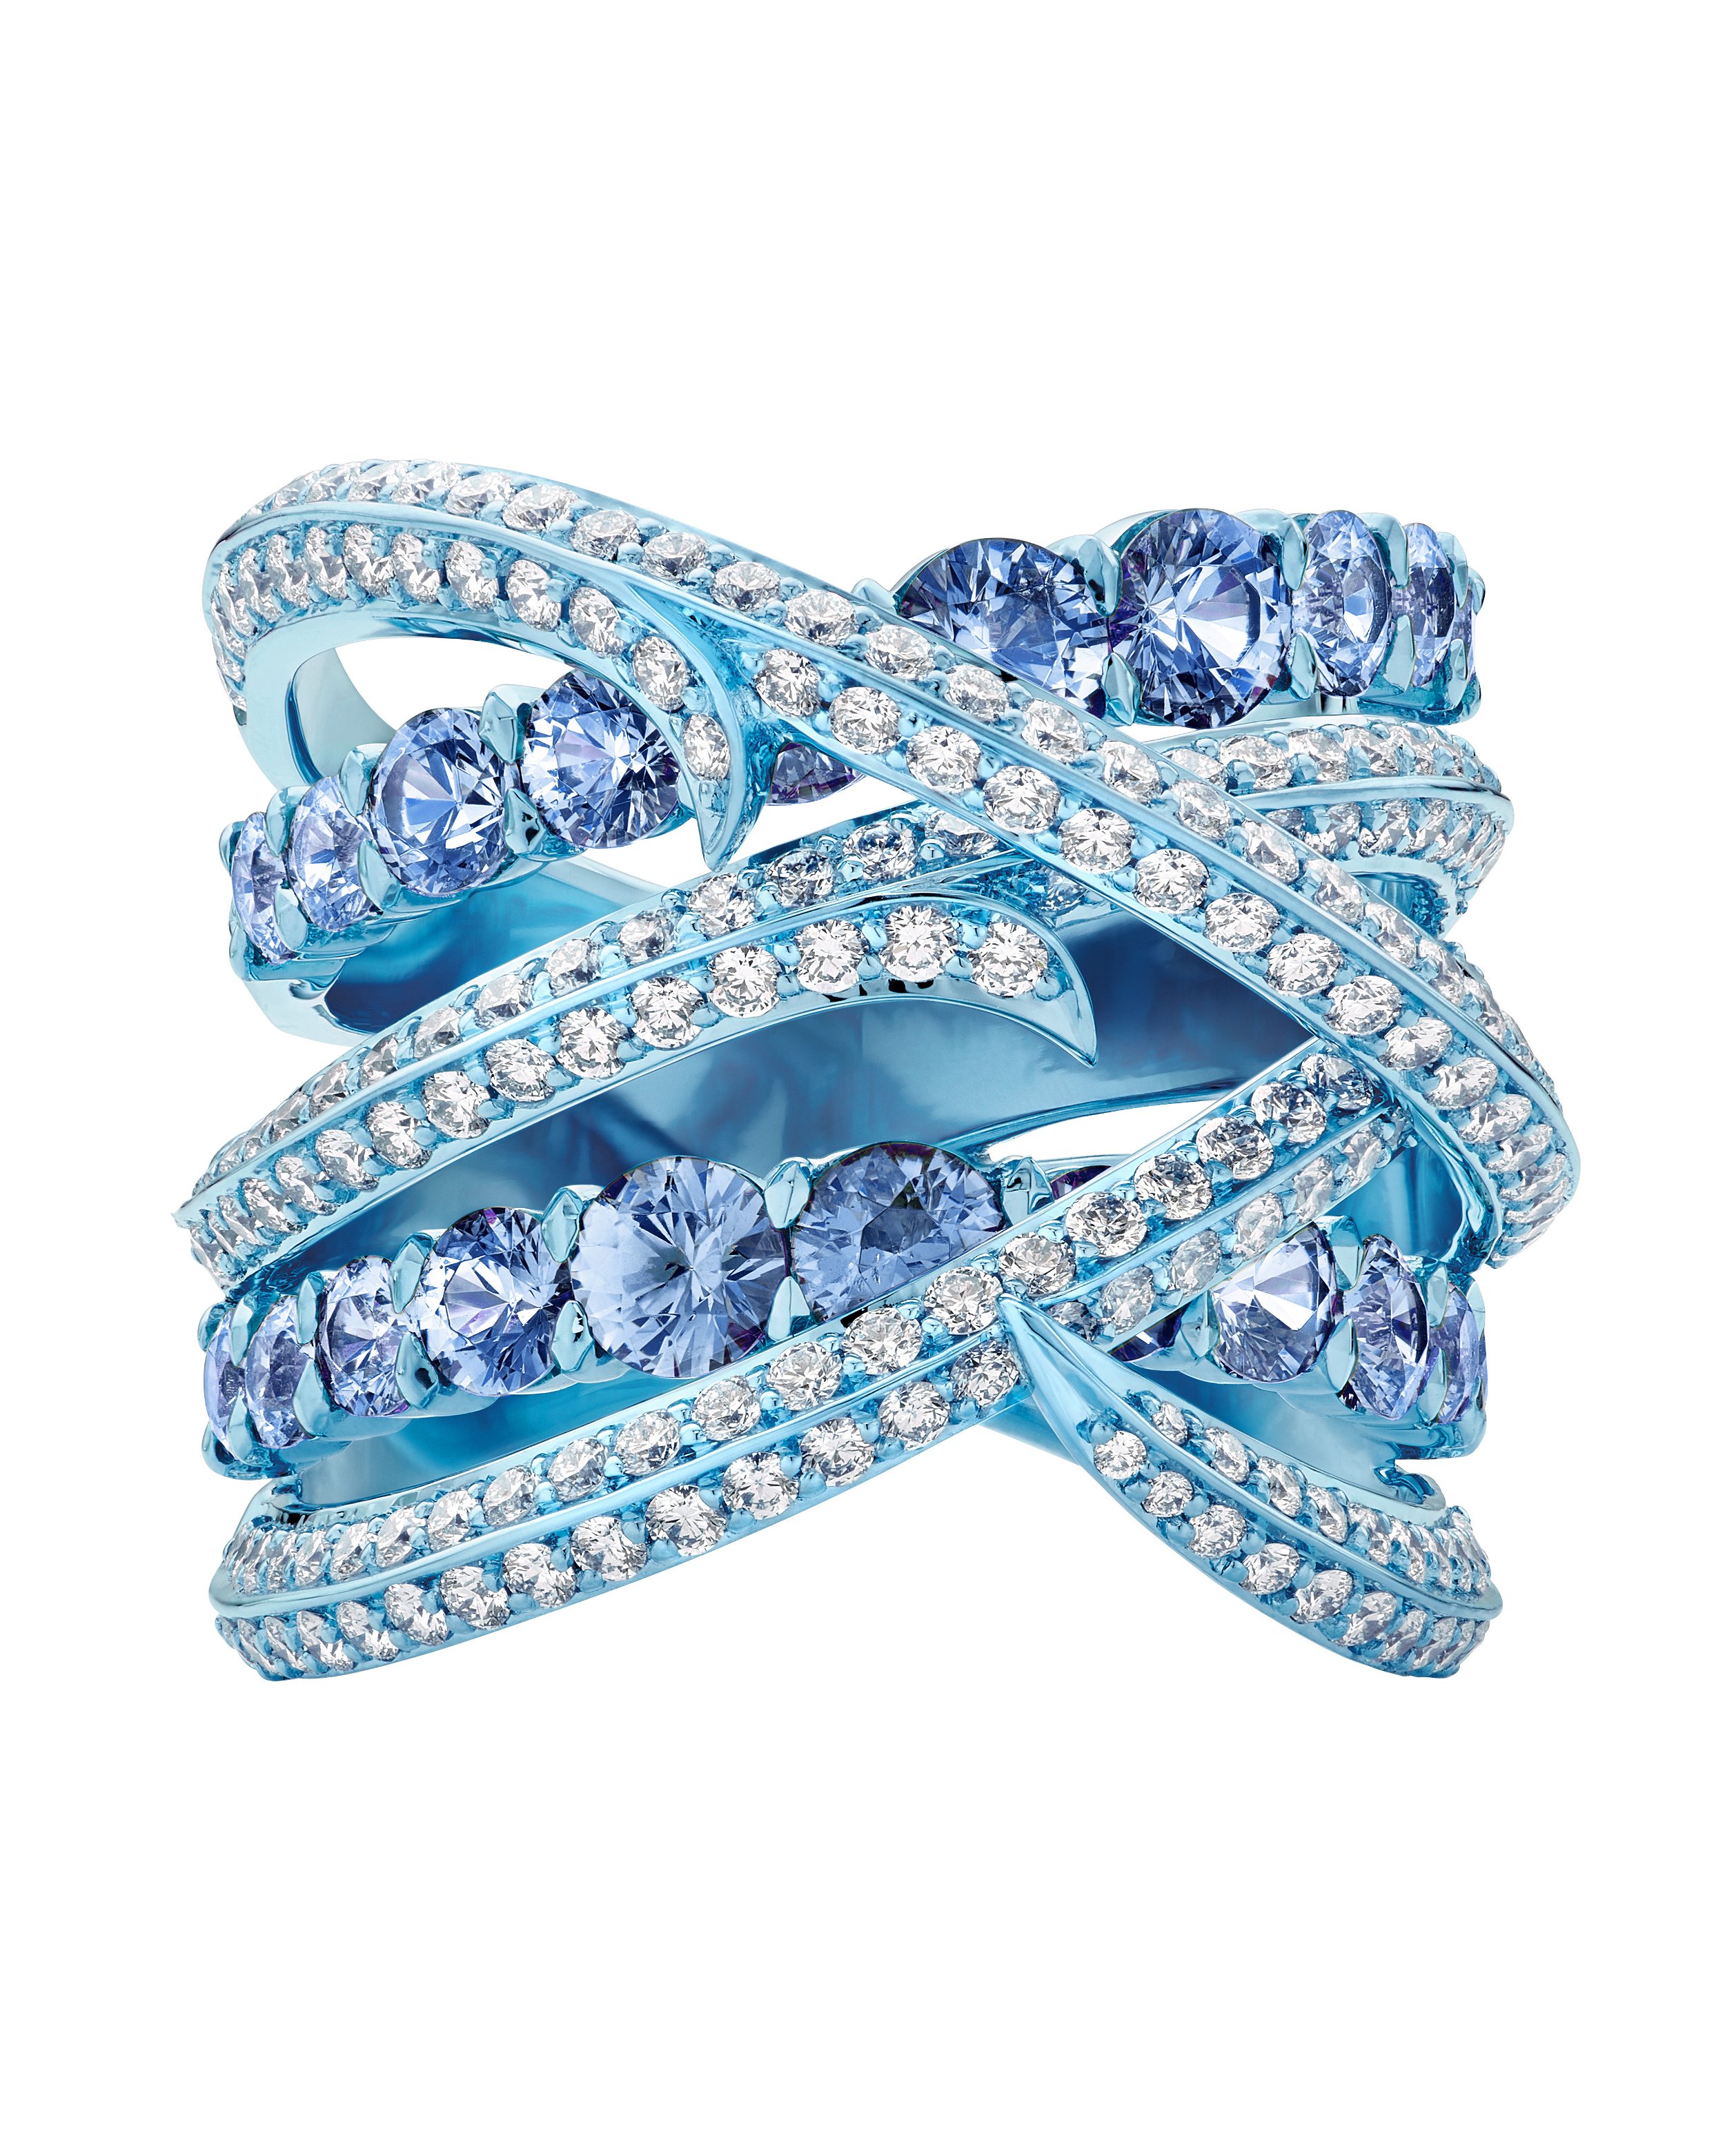 Thorn Embrace Gem Band Ring with Blue Sapphires and White Diamonds in Titanium and 18kt White Gold - Size 6